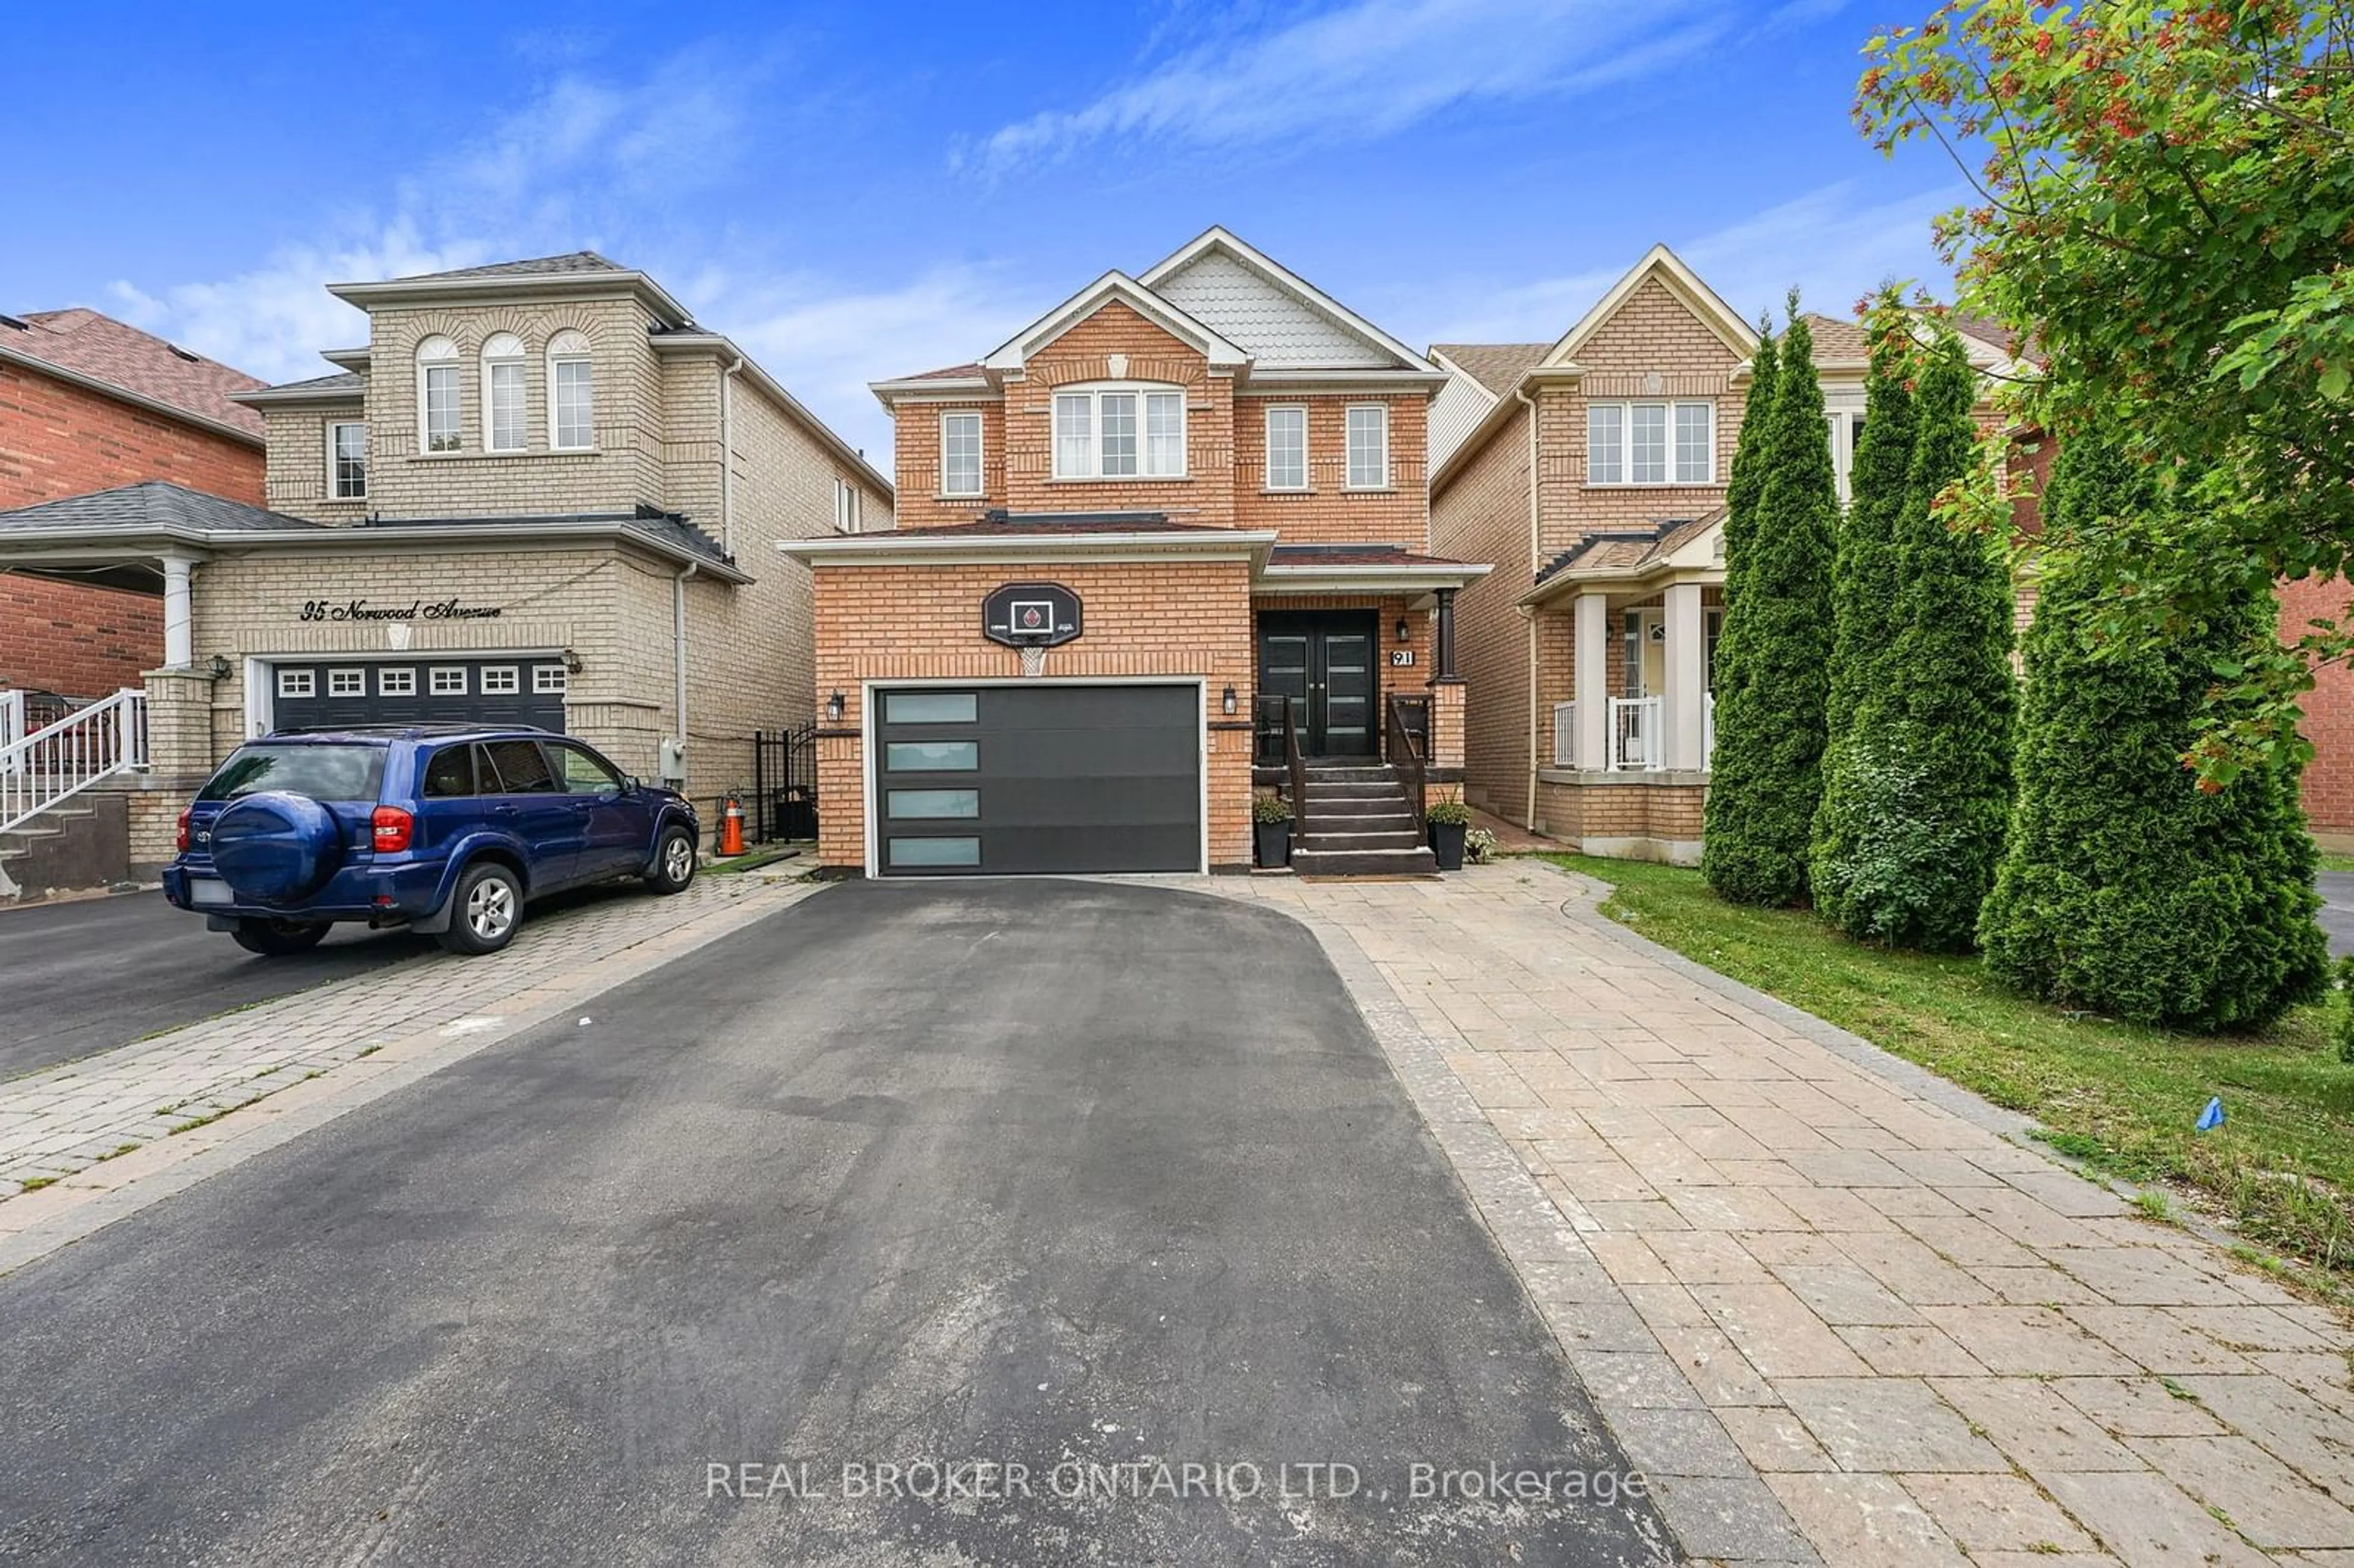 Frontside or backside of a home for 91 Norwood Ave, Vaughan Ontario L6A 3V7